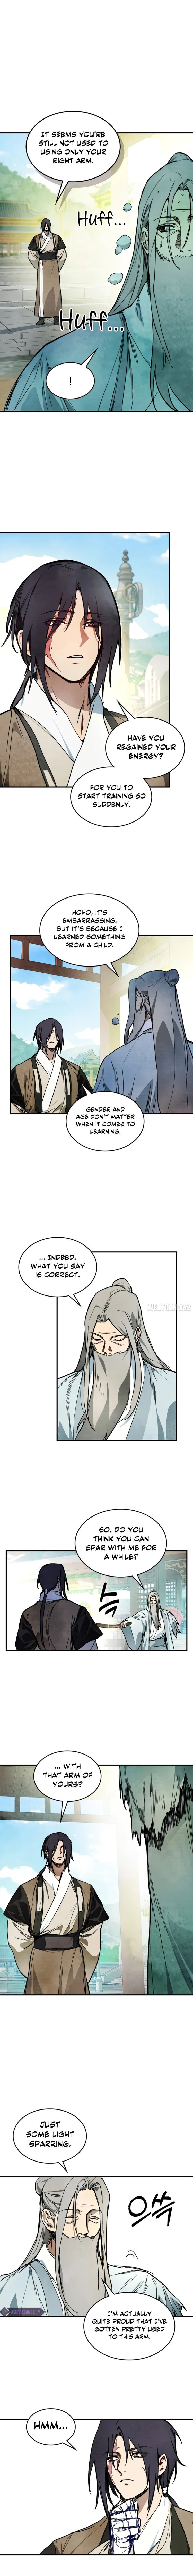 chronicles-of-the-martial-gods-return-chap-47-8